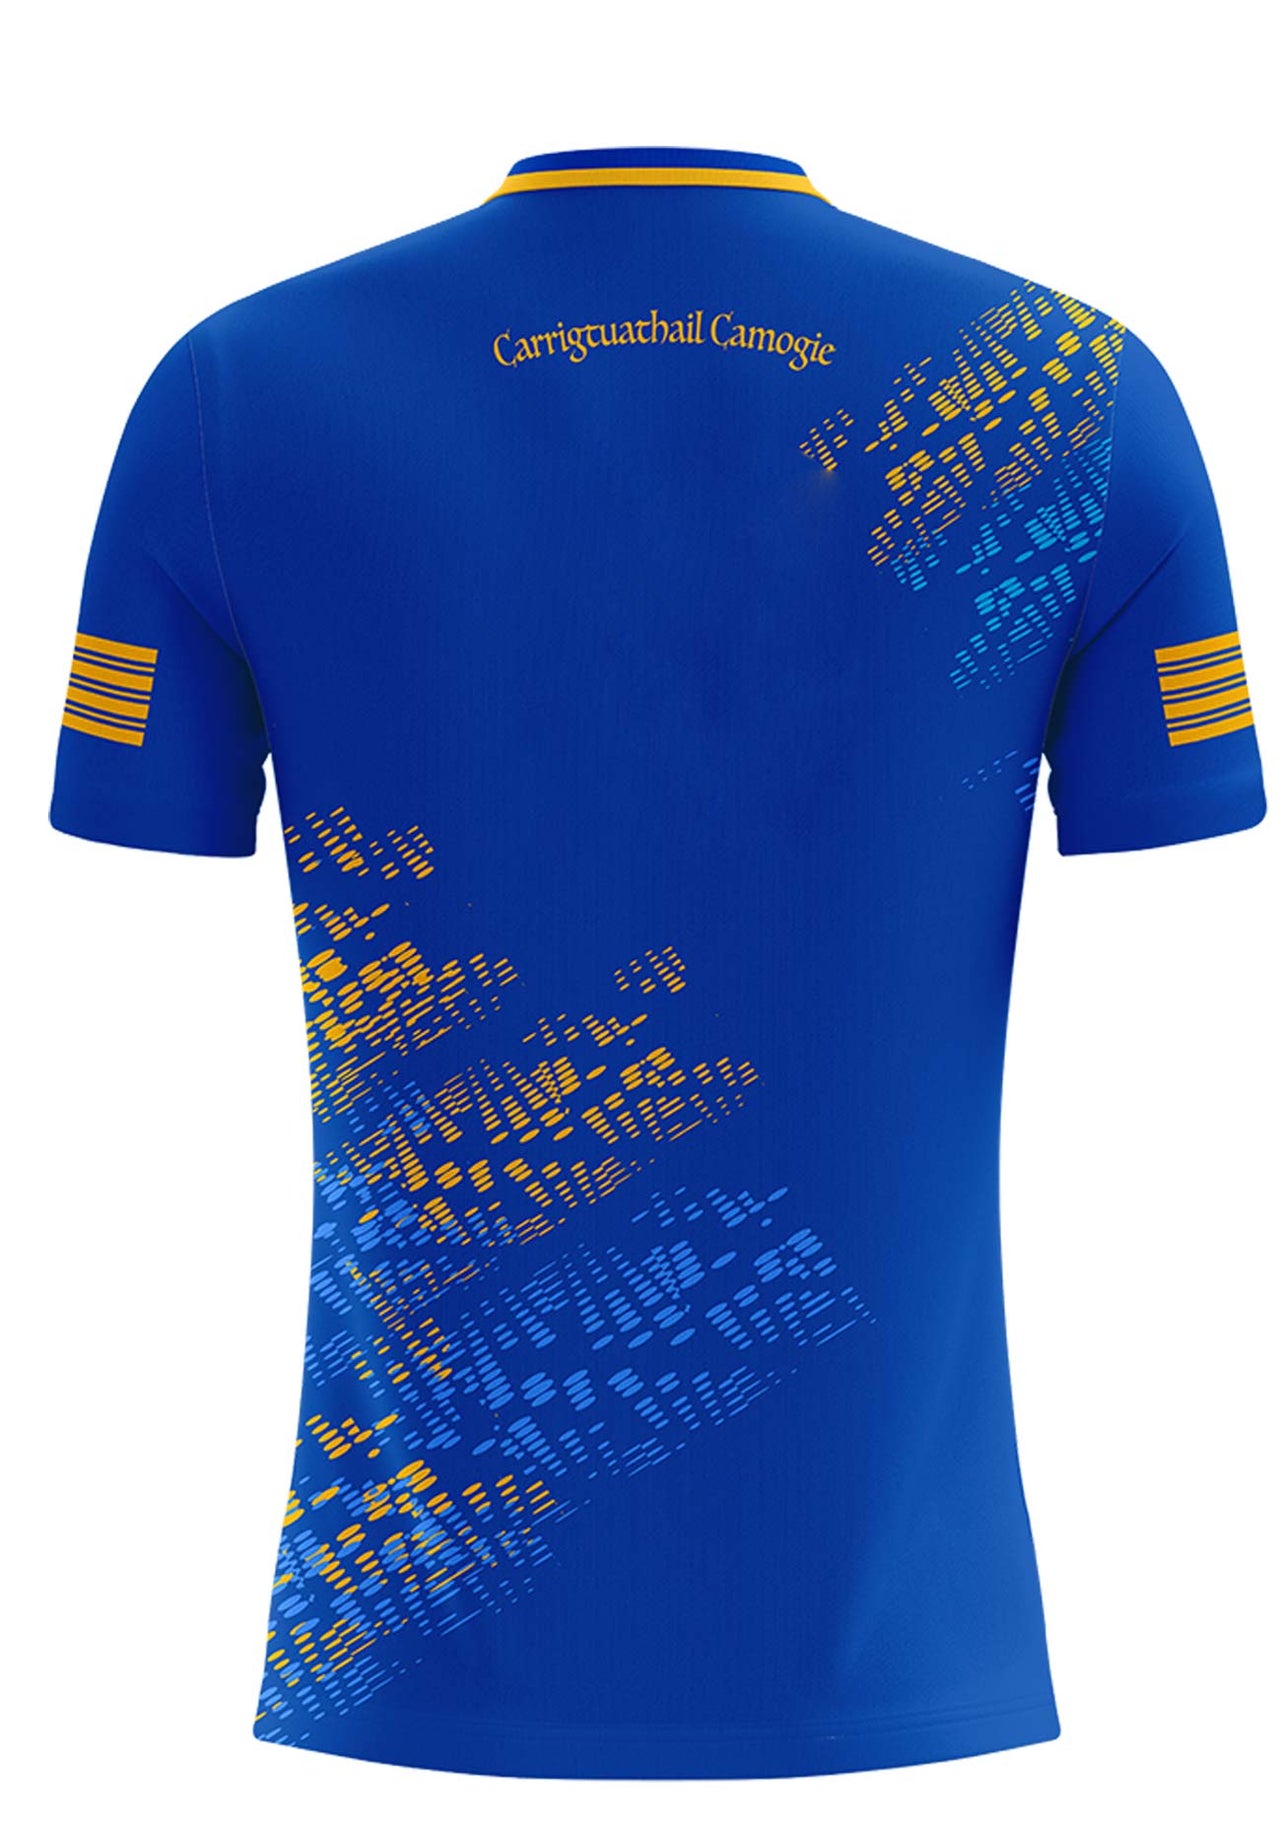 Carrigtwohill Camogie Home Jersey Kids